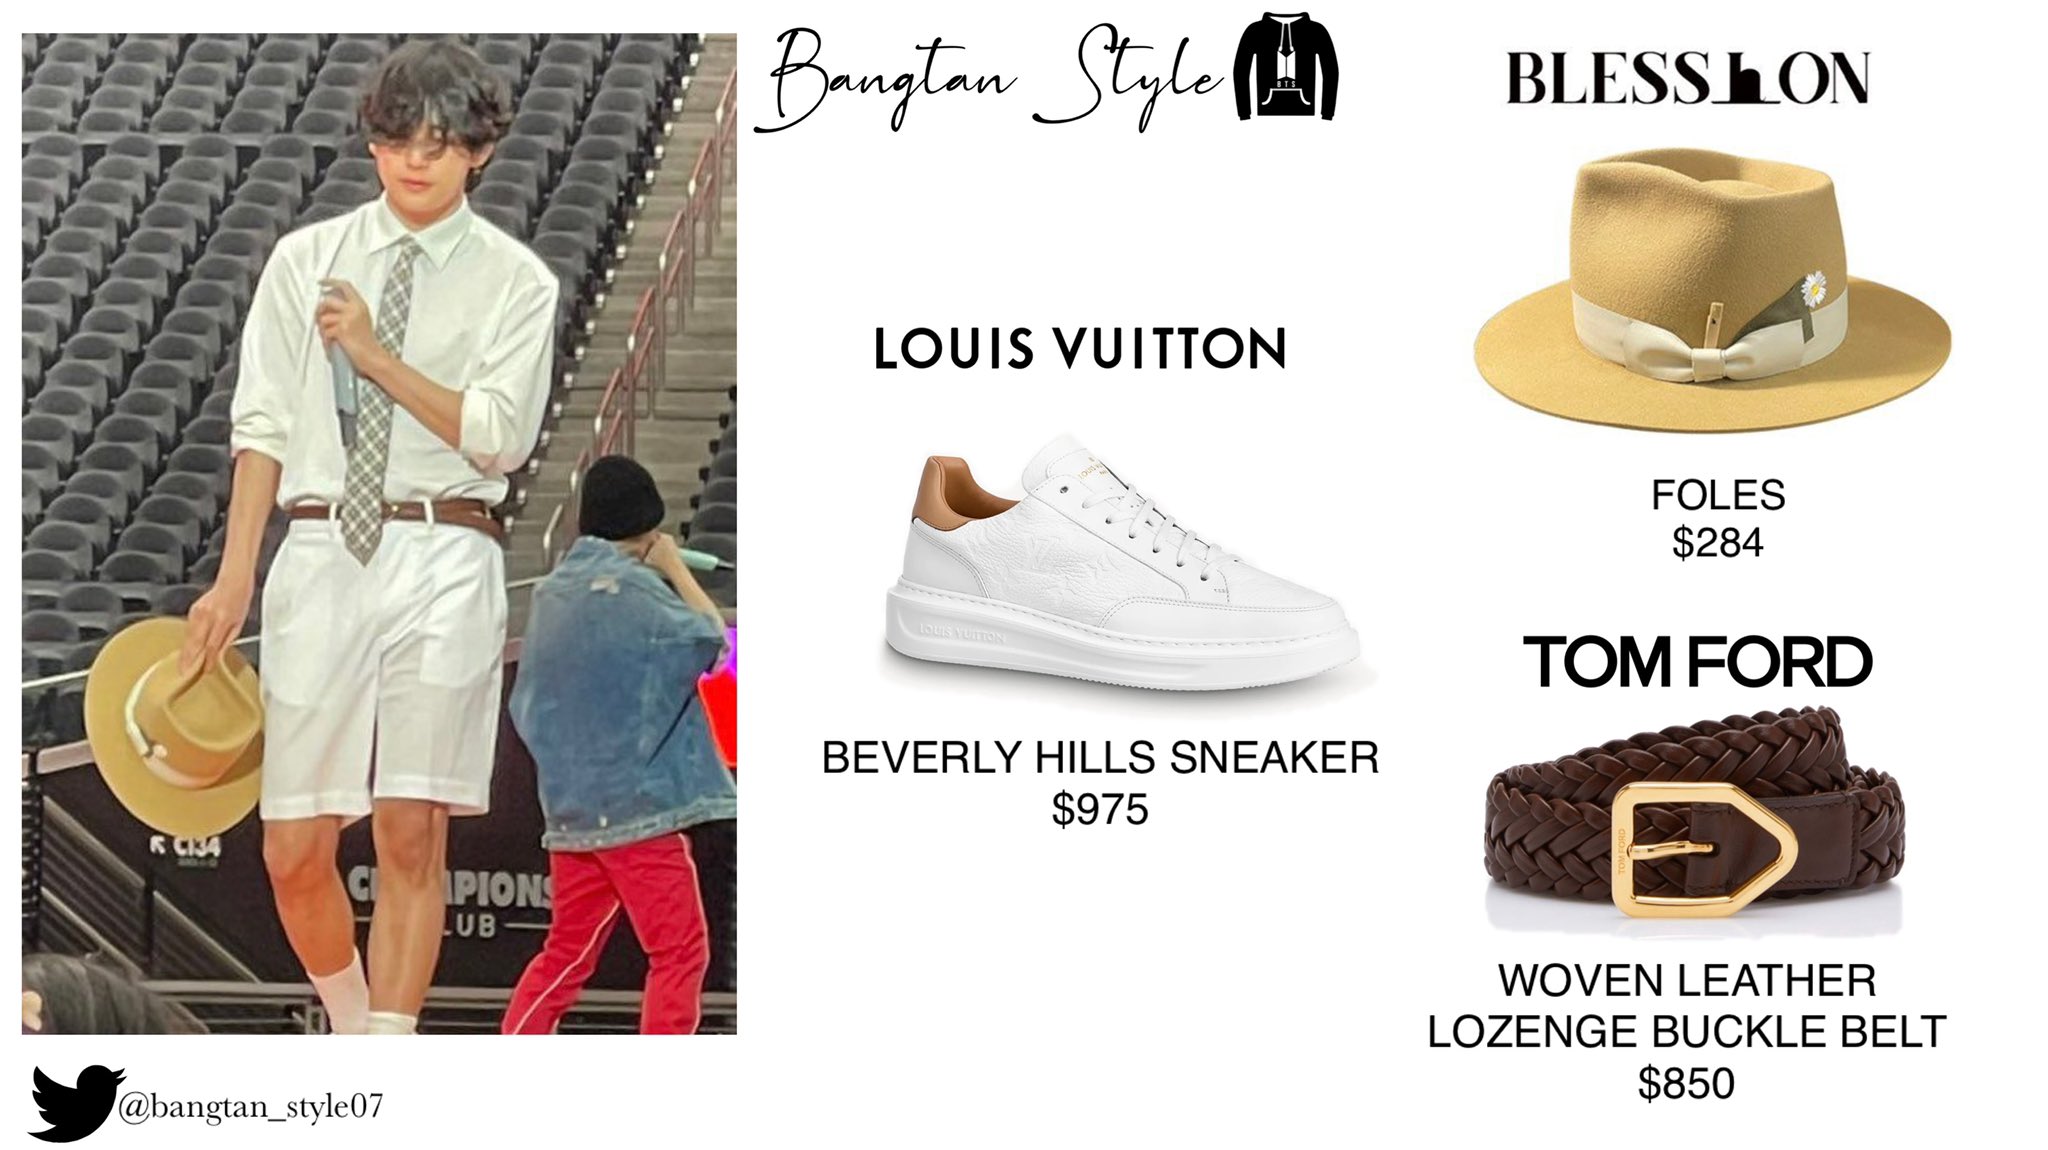 Bangtan Style⁷ (slow) on X: BTS on You Quiz On The Block BTS OUTFITS [ Louis  Vuitton] #SUGA #JIN #RM @BTS_twt  / X